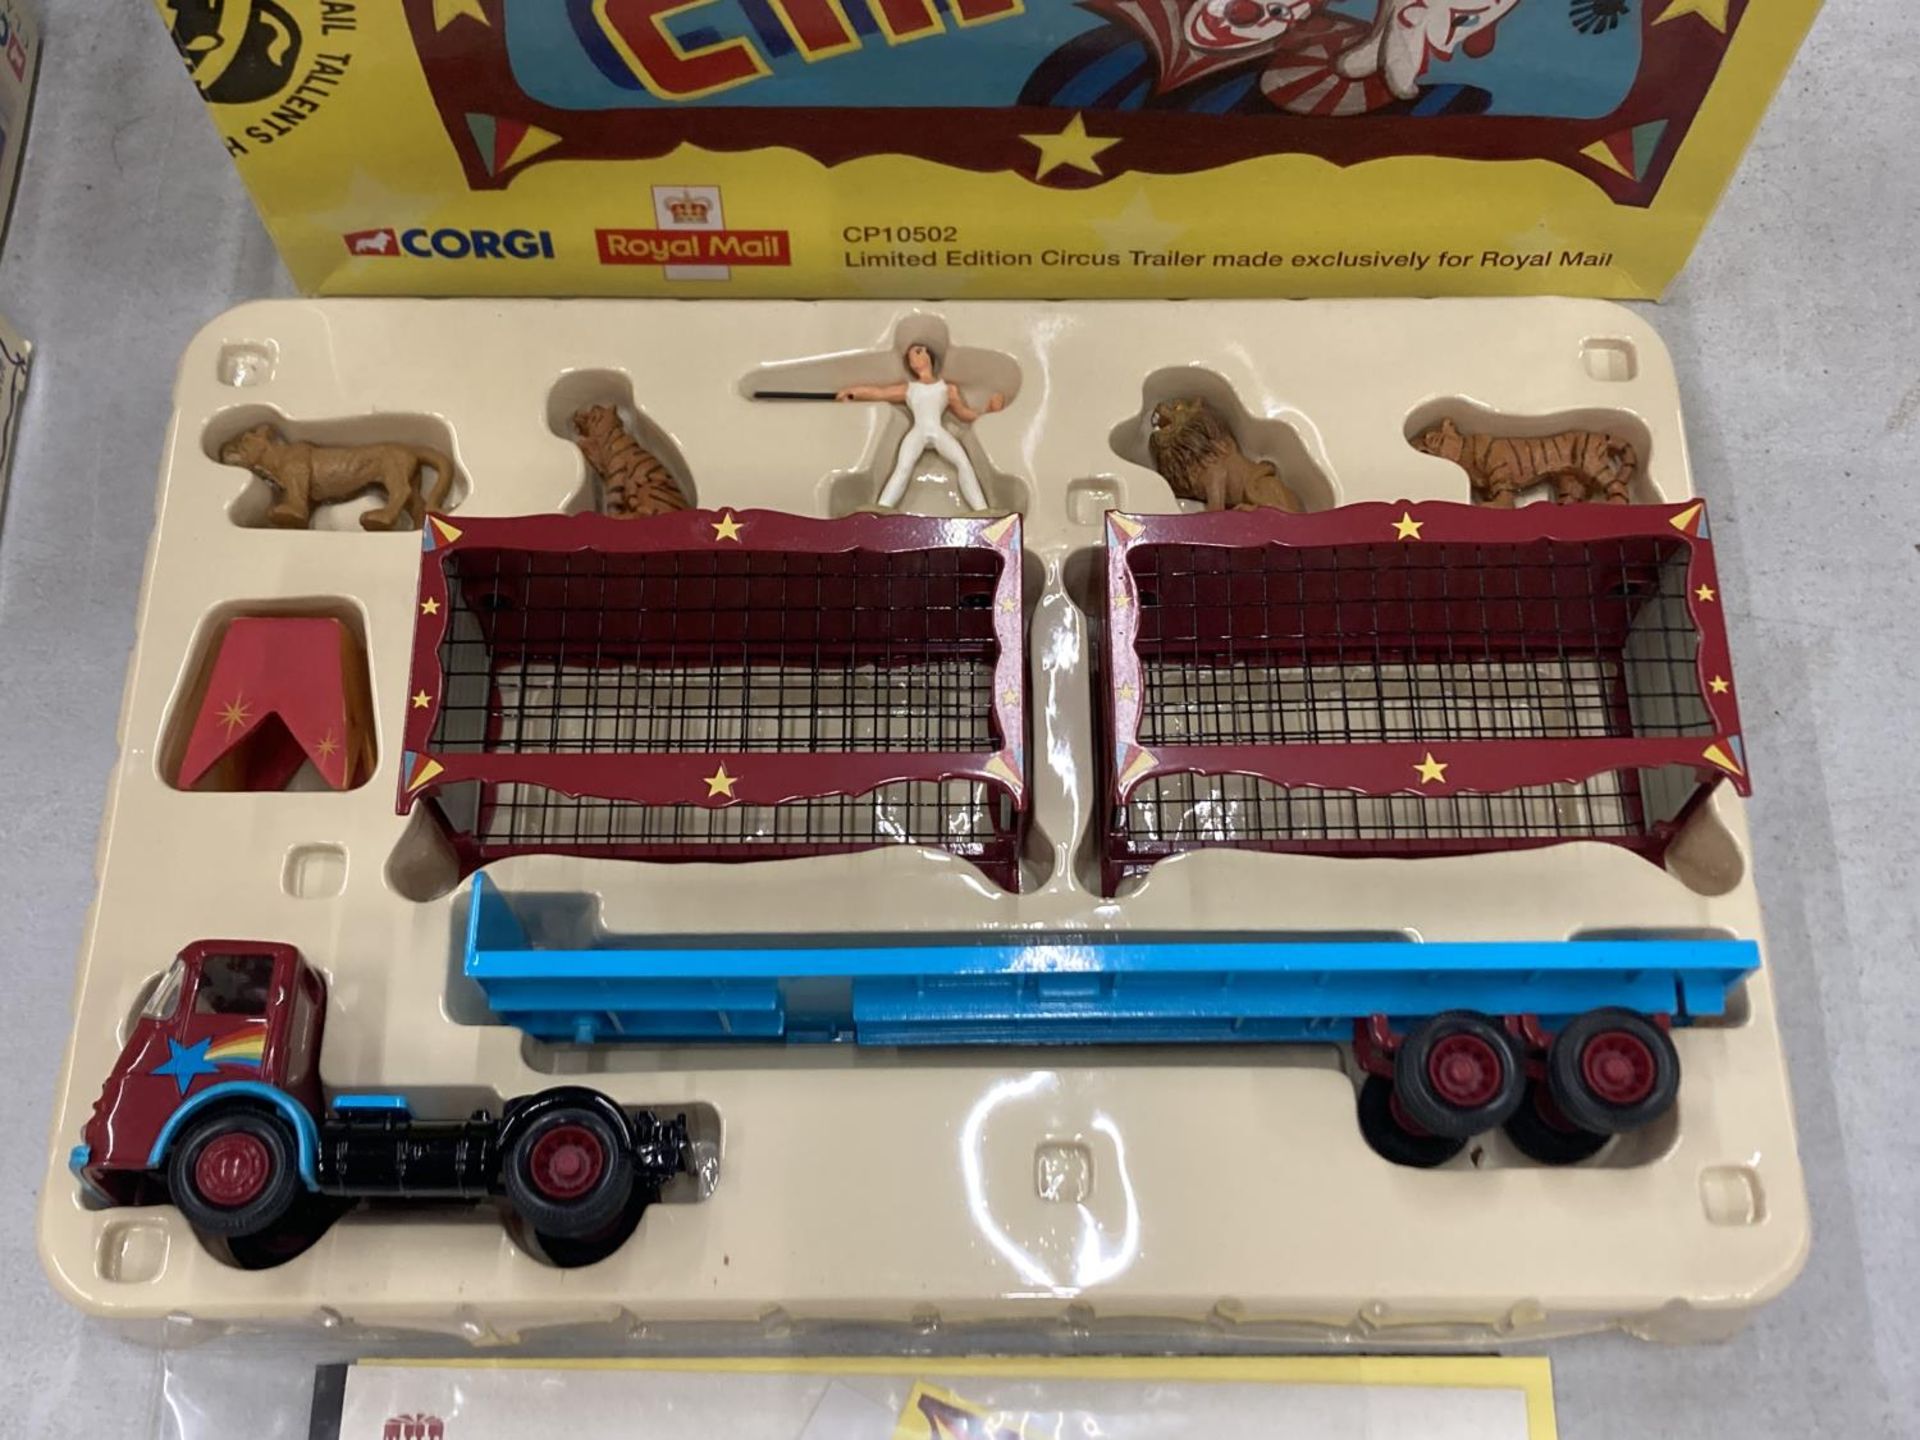 A BOXED CORGI CP10502 LIMITED EDITION CIRCUS TRAILER MADE EXCLUSIVELY FOR ROYAL MAIL - Image 2 of 4